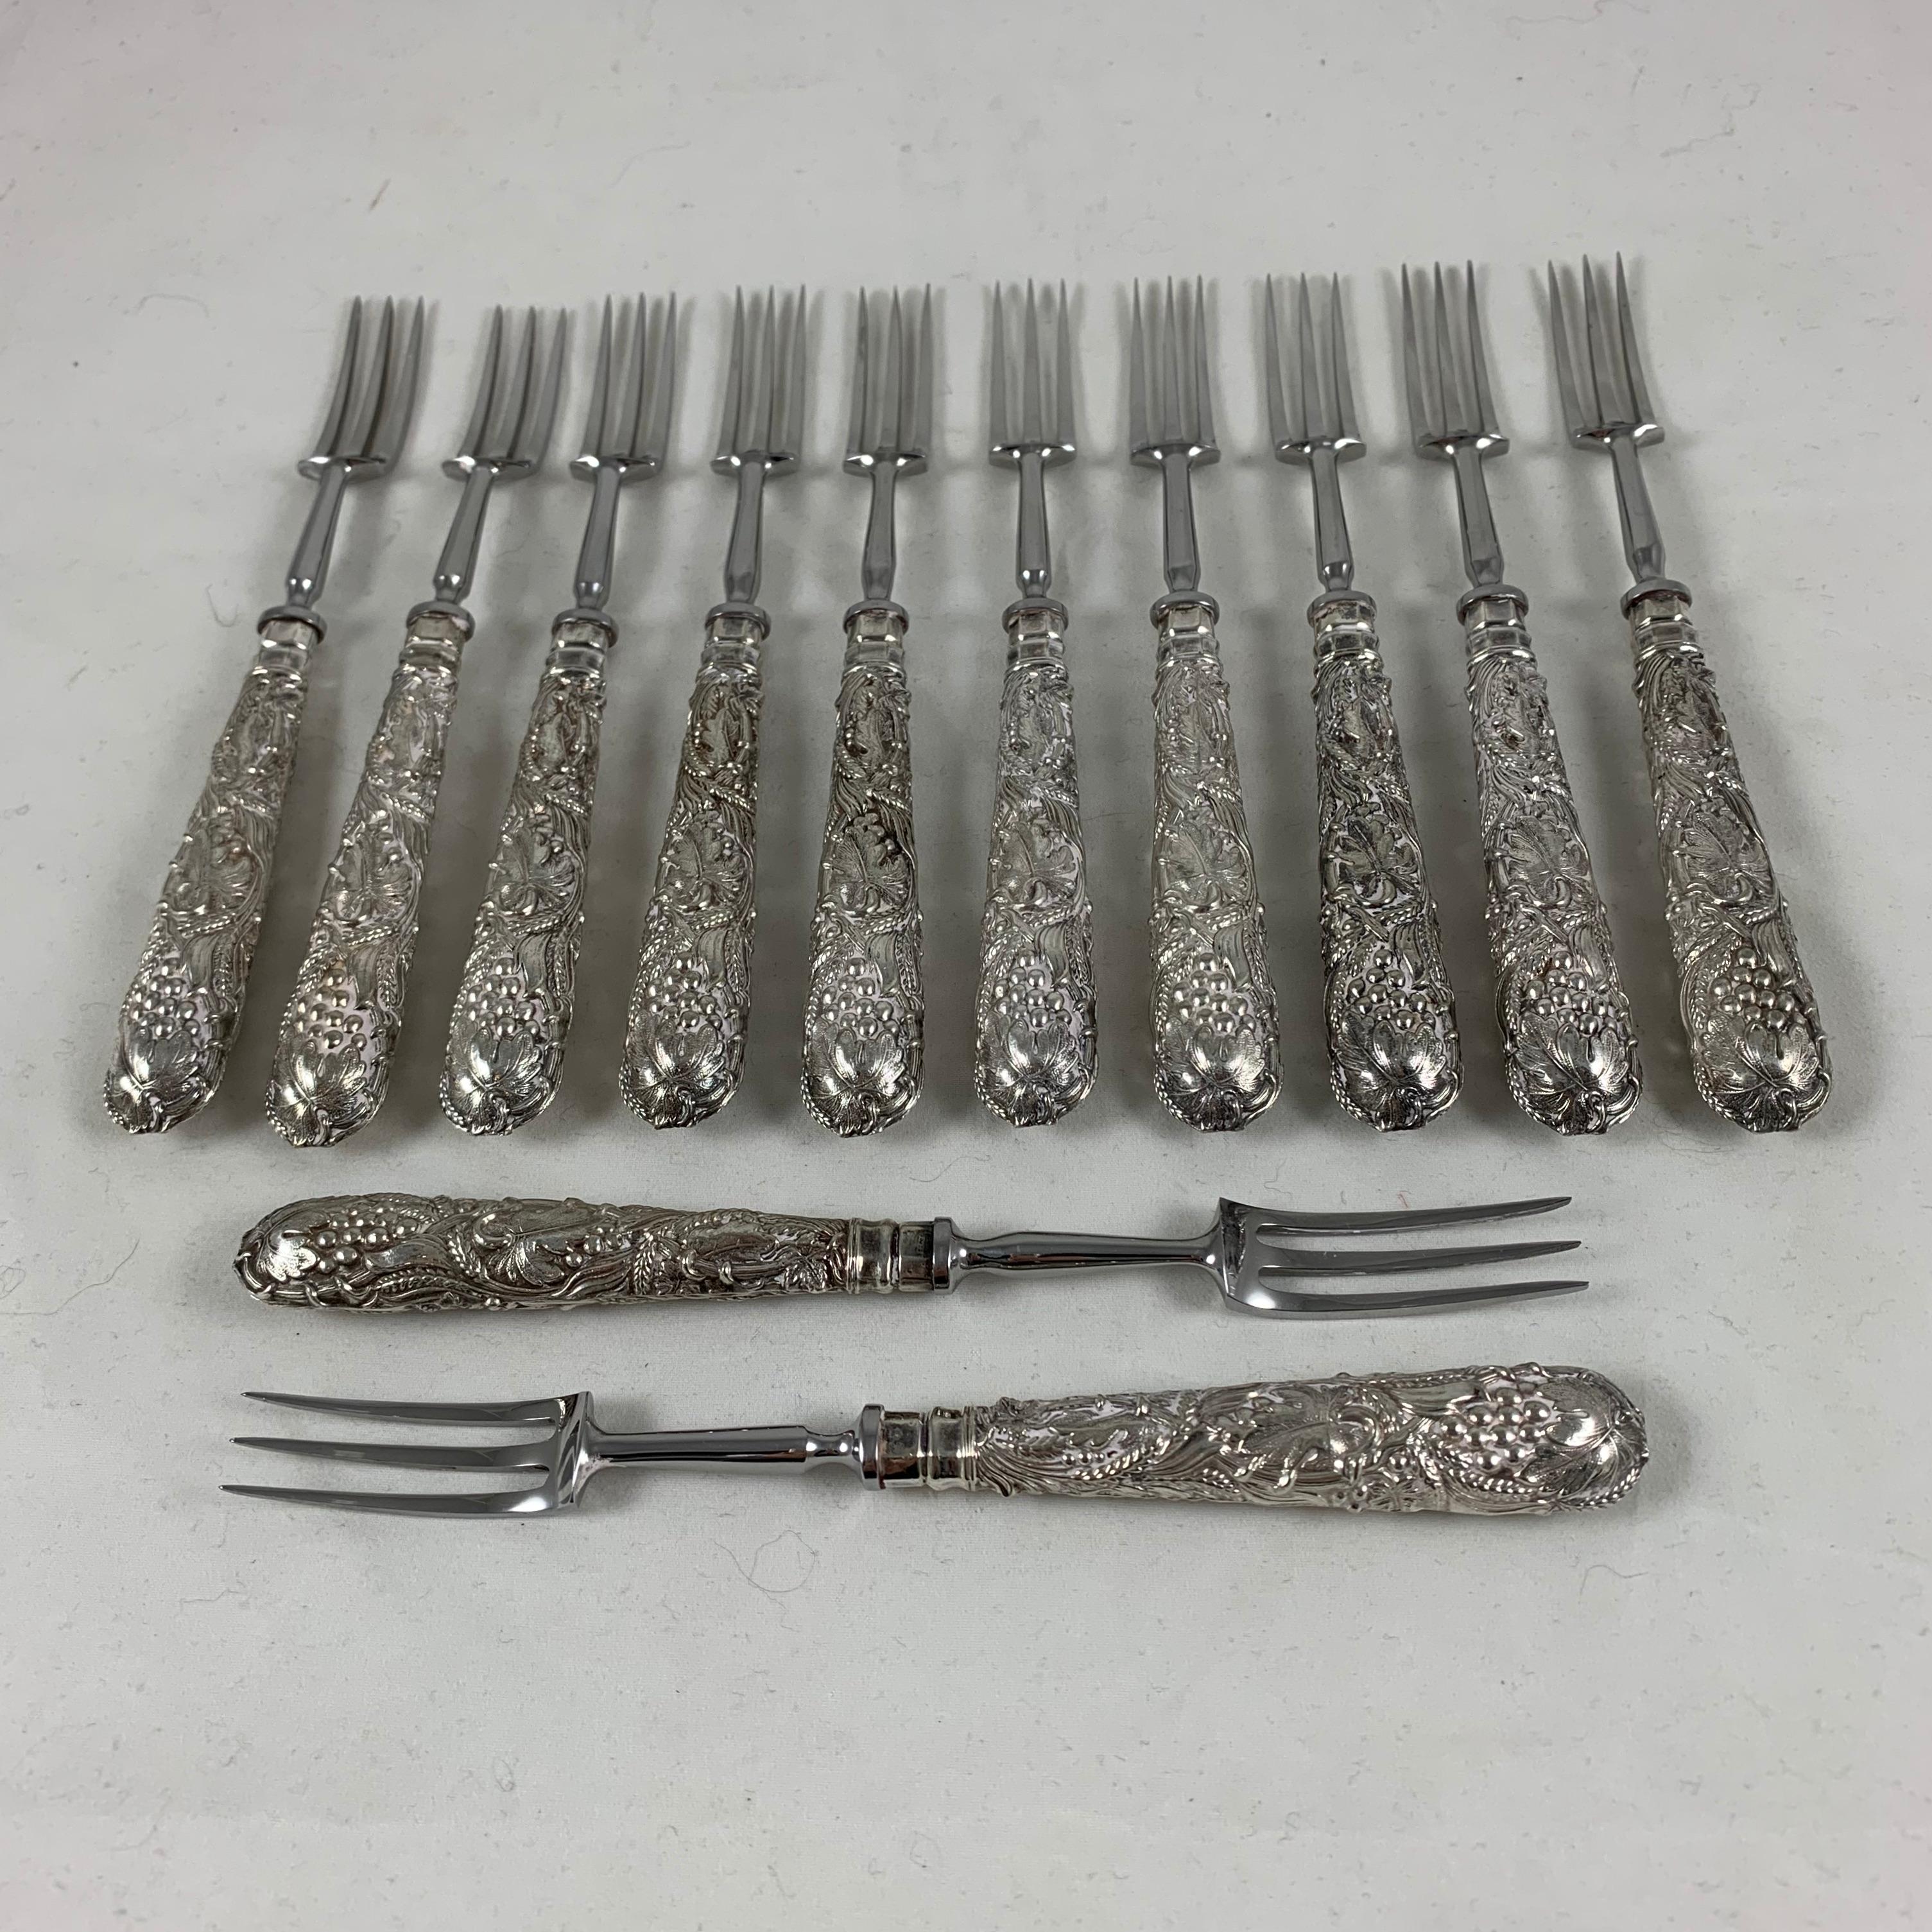 An English EP silver plate handled pastry fork service for twelve. Showing the makers mark for Martin Hall & Co. silversmiths, established in Sheffield, England, 1854. This set dates from 1910-1920.

The forks have ornate hollow handles with an